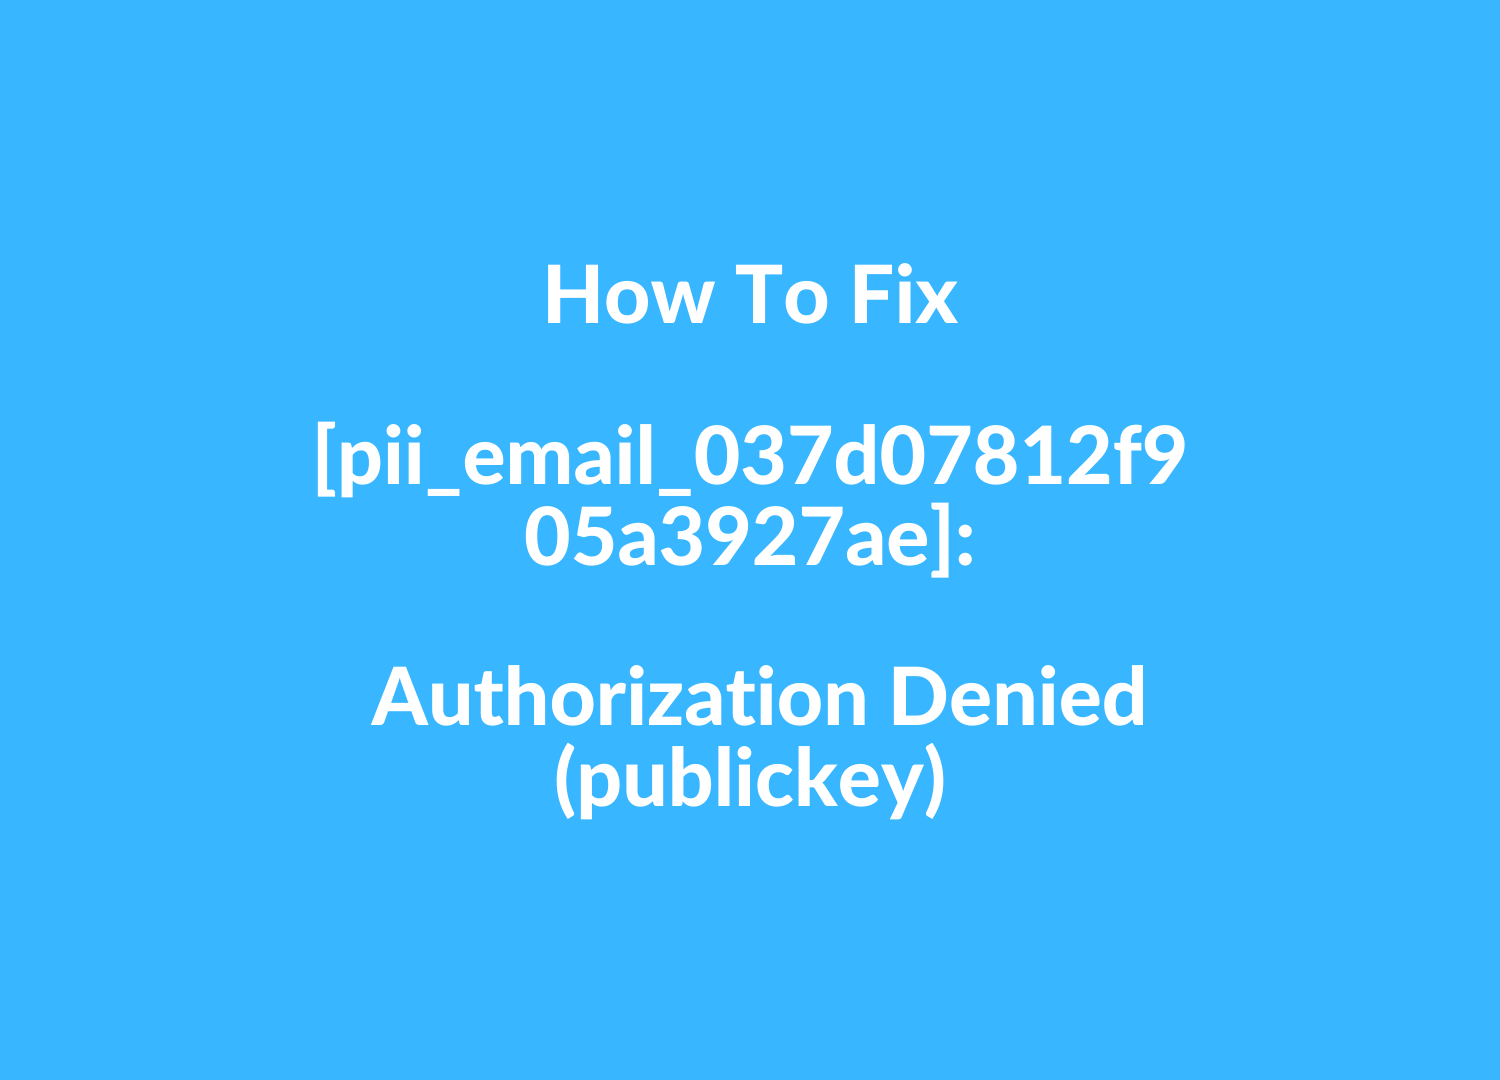  How To Fix [pii_email_037d07812f905a3927ae] Error?